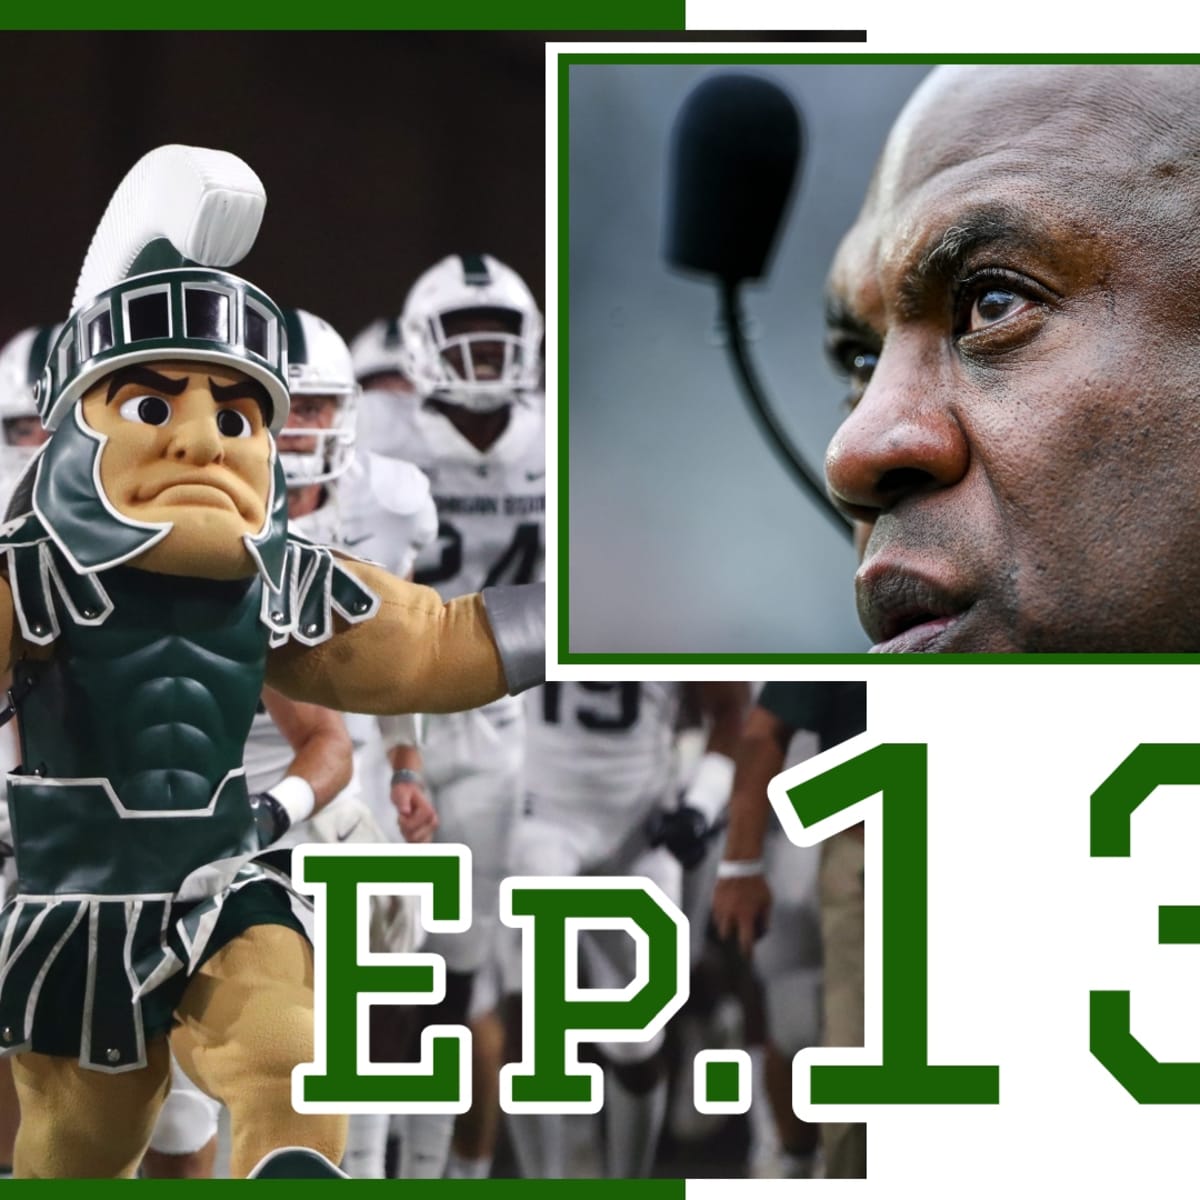 This Is Sparta MSU Michigan state football podcast apparel news